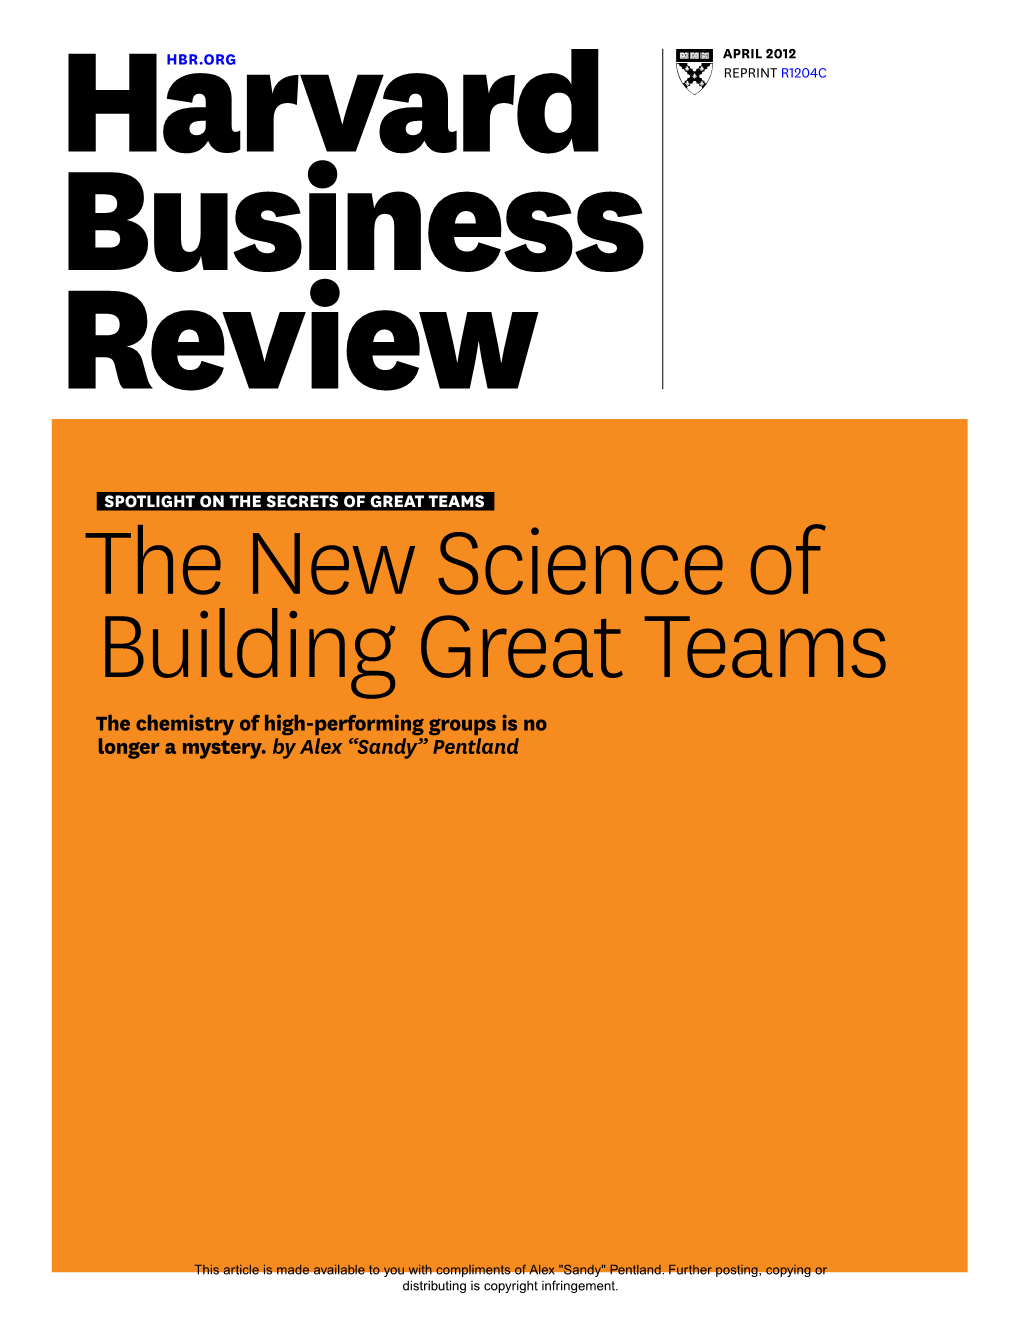 The New Science of Building Great Teams the Chemistry of High-Performing Groups Is No Longer a Mystery